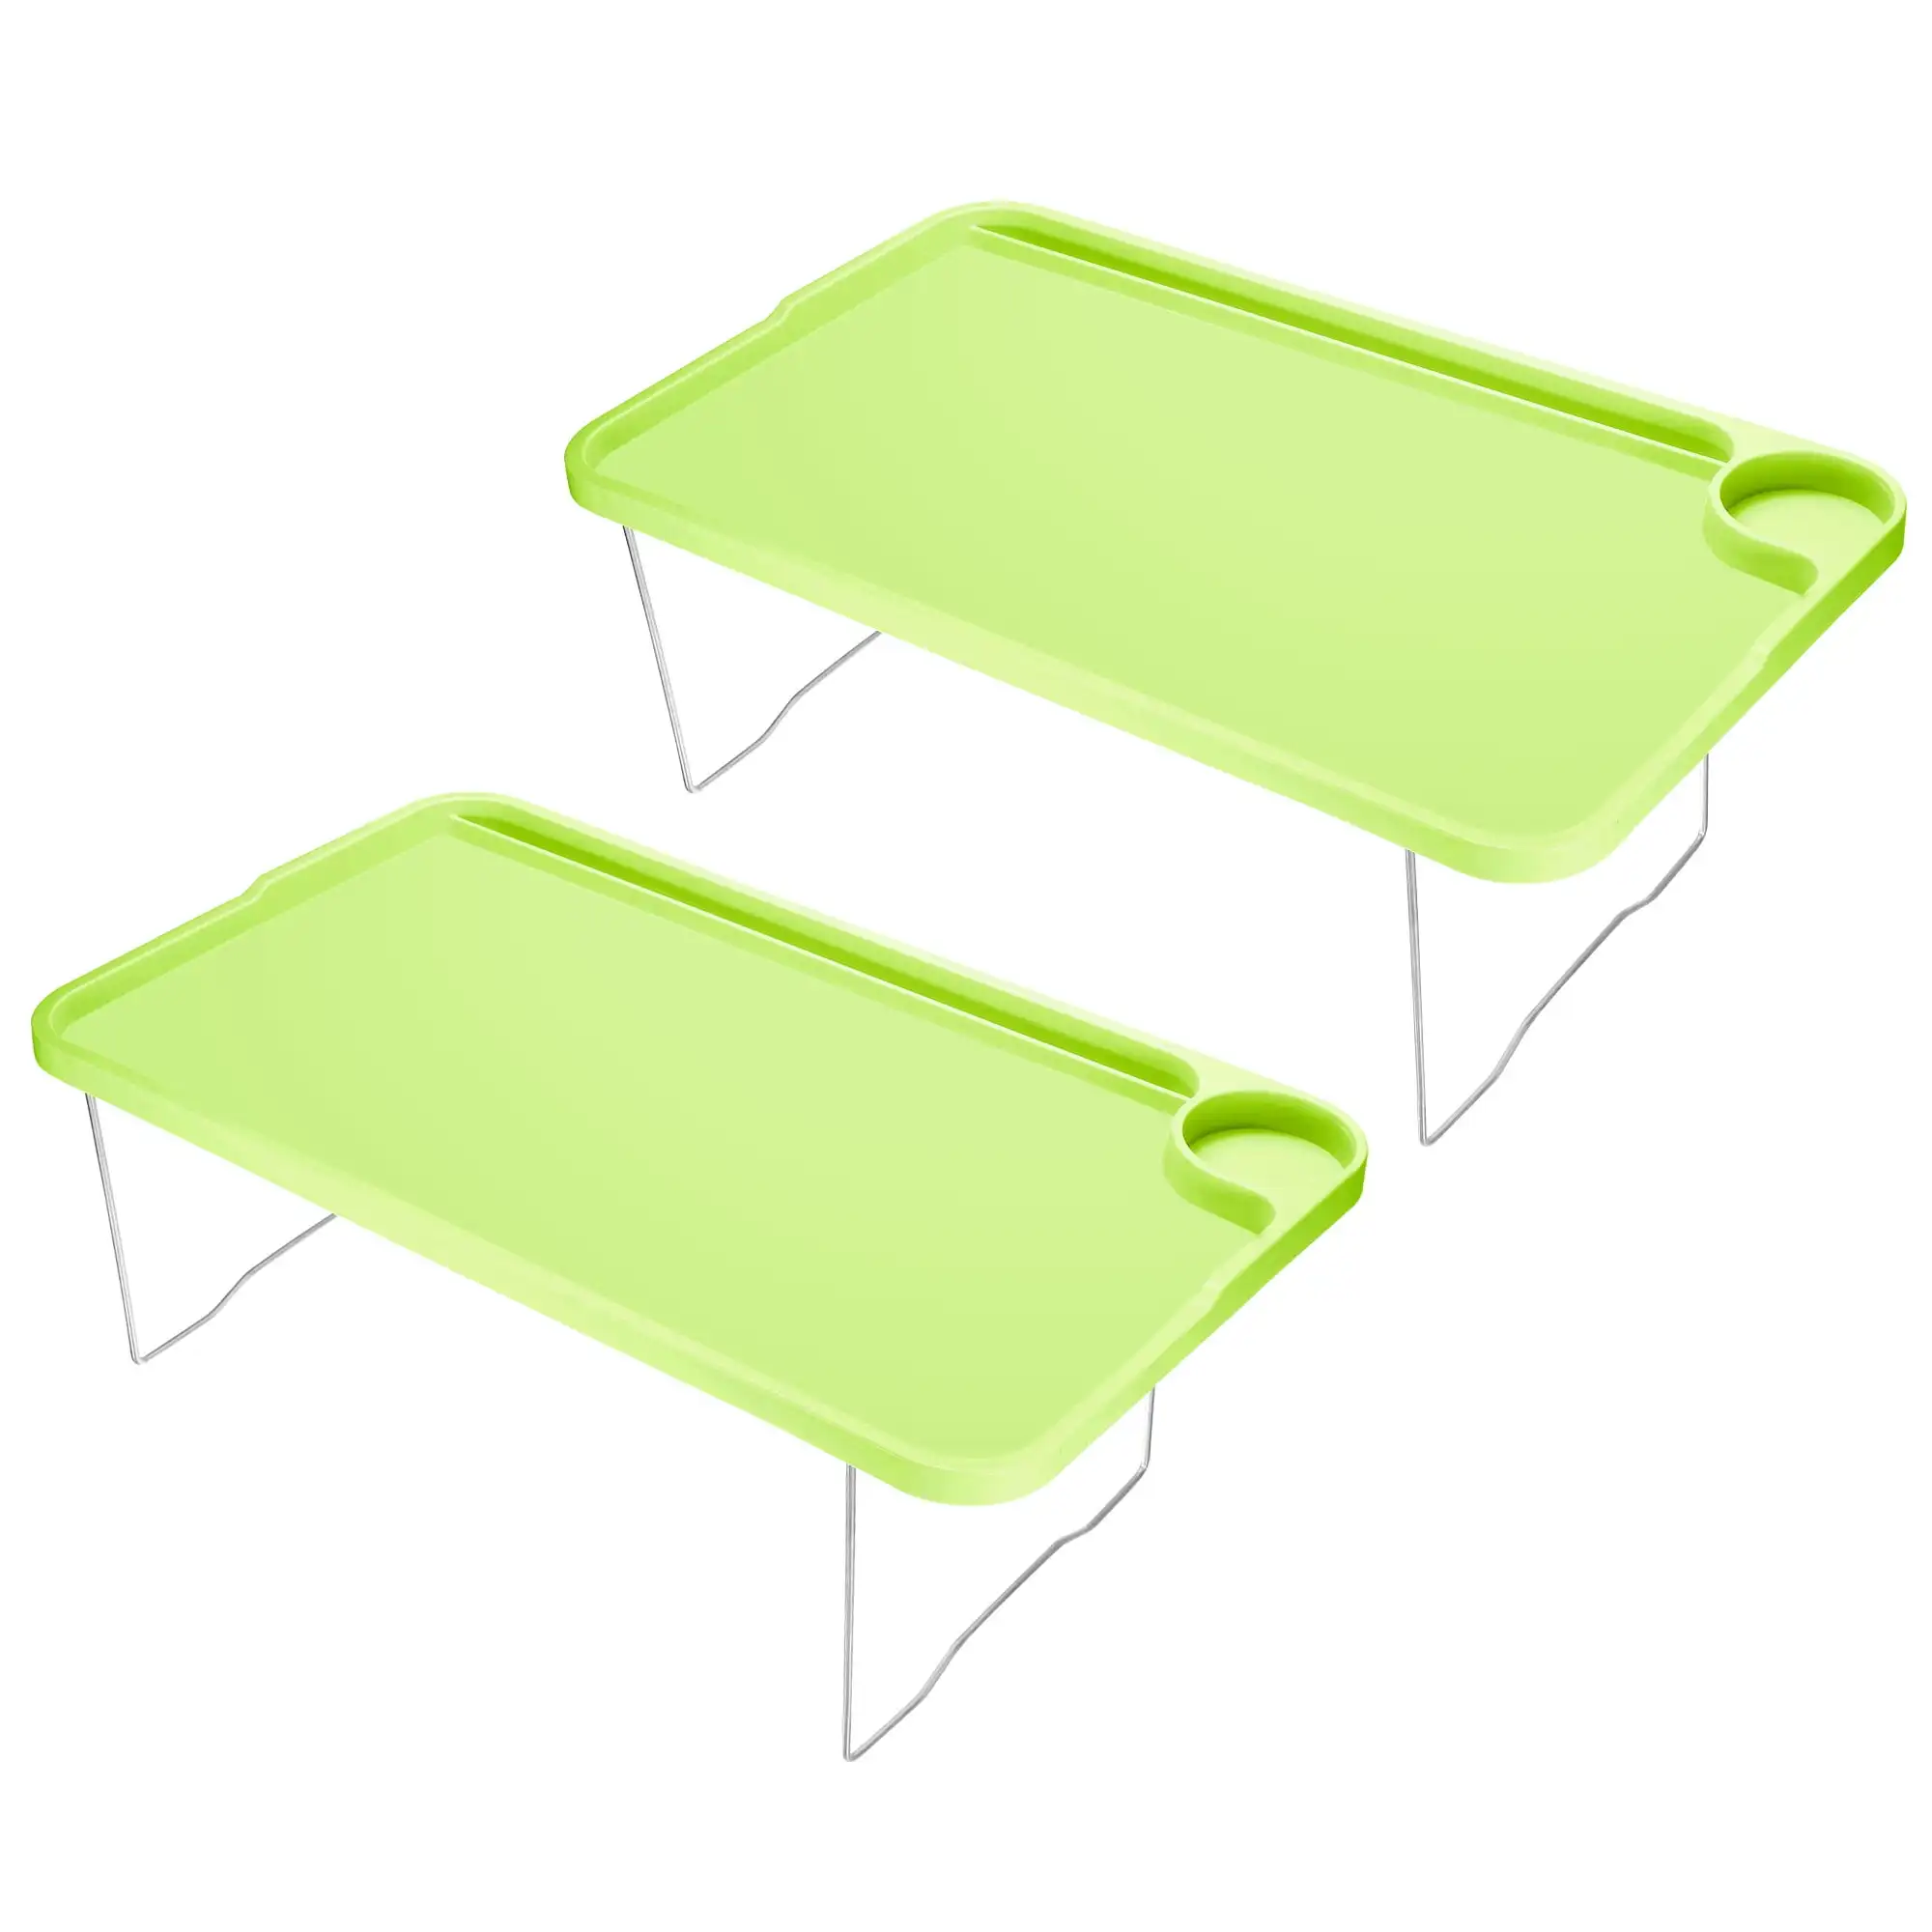 

Unique Bargains Breakfast Tray Tables with Folding Legs Laptop Snack Desk for Eating Green